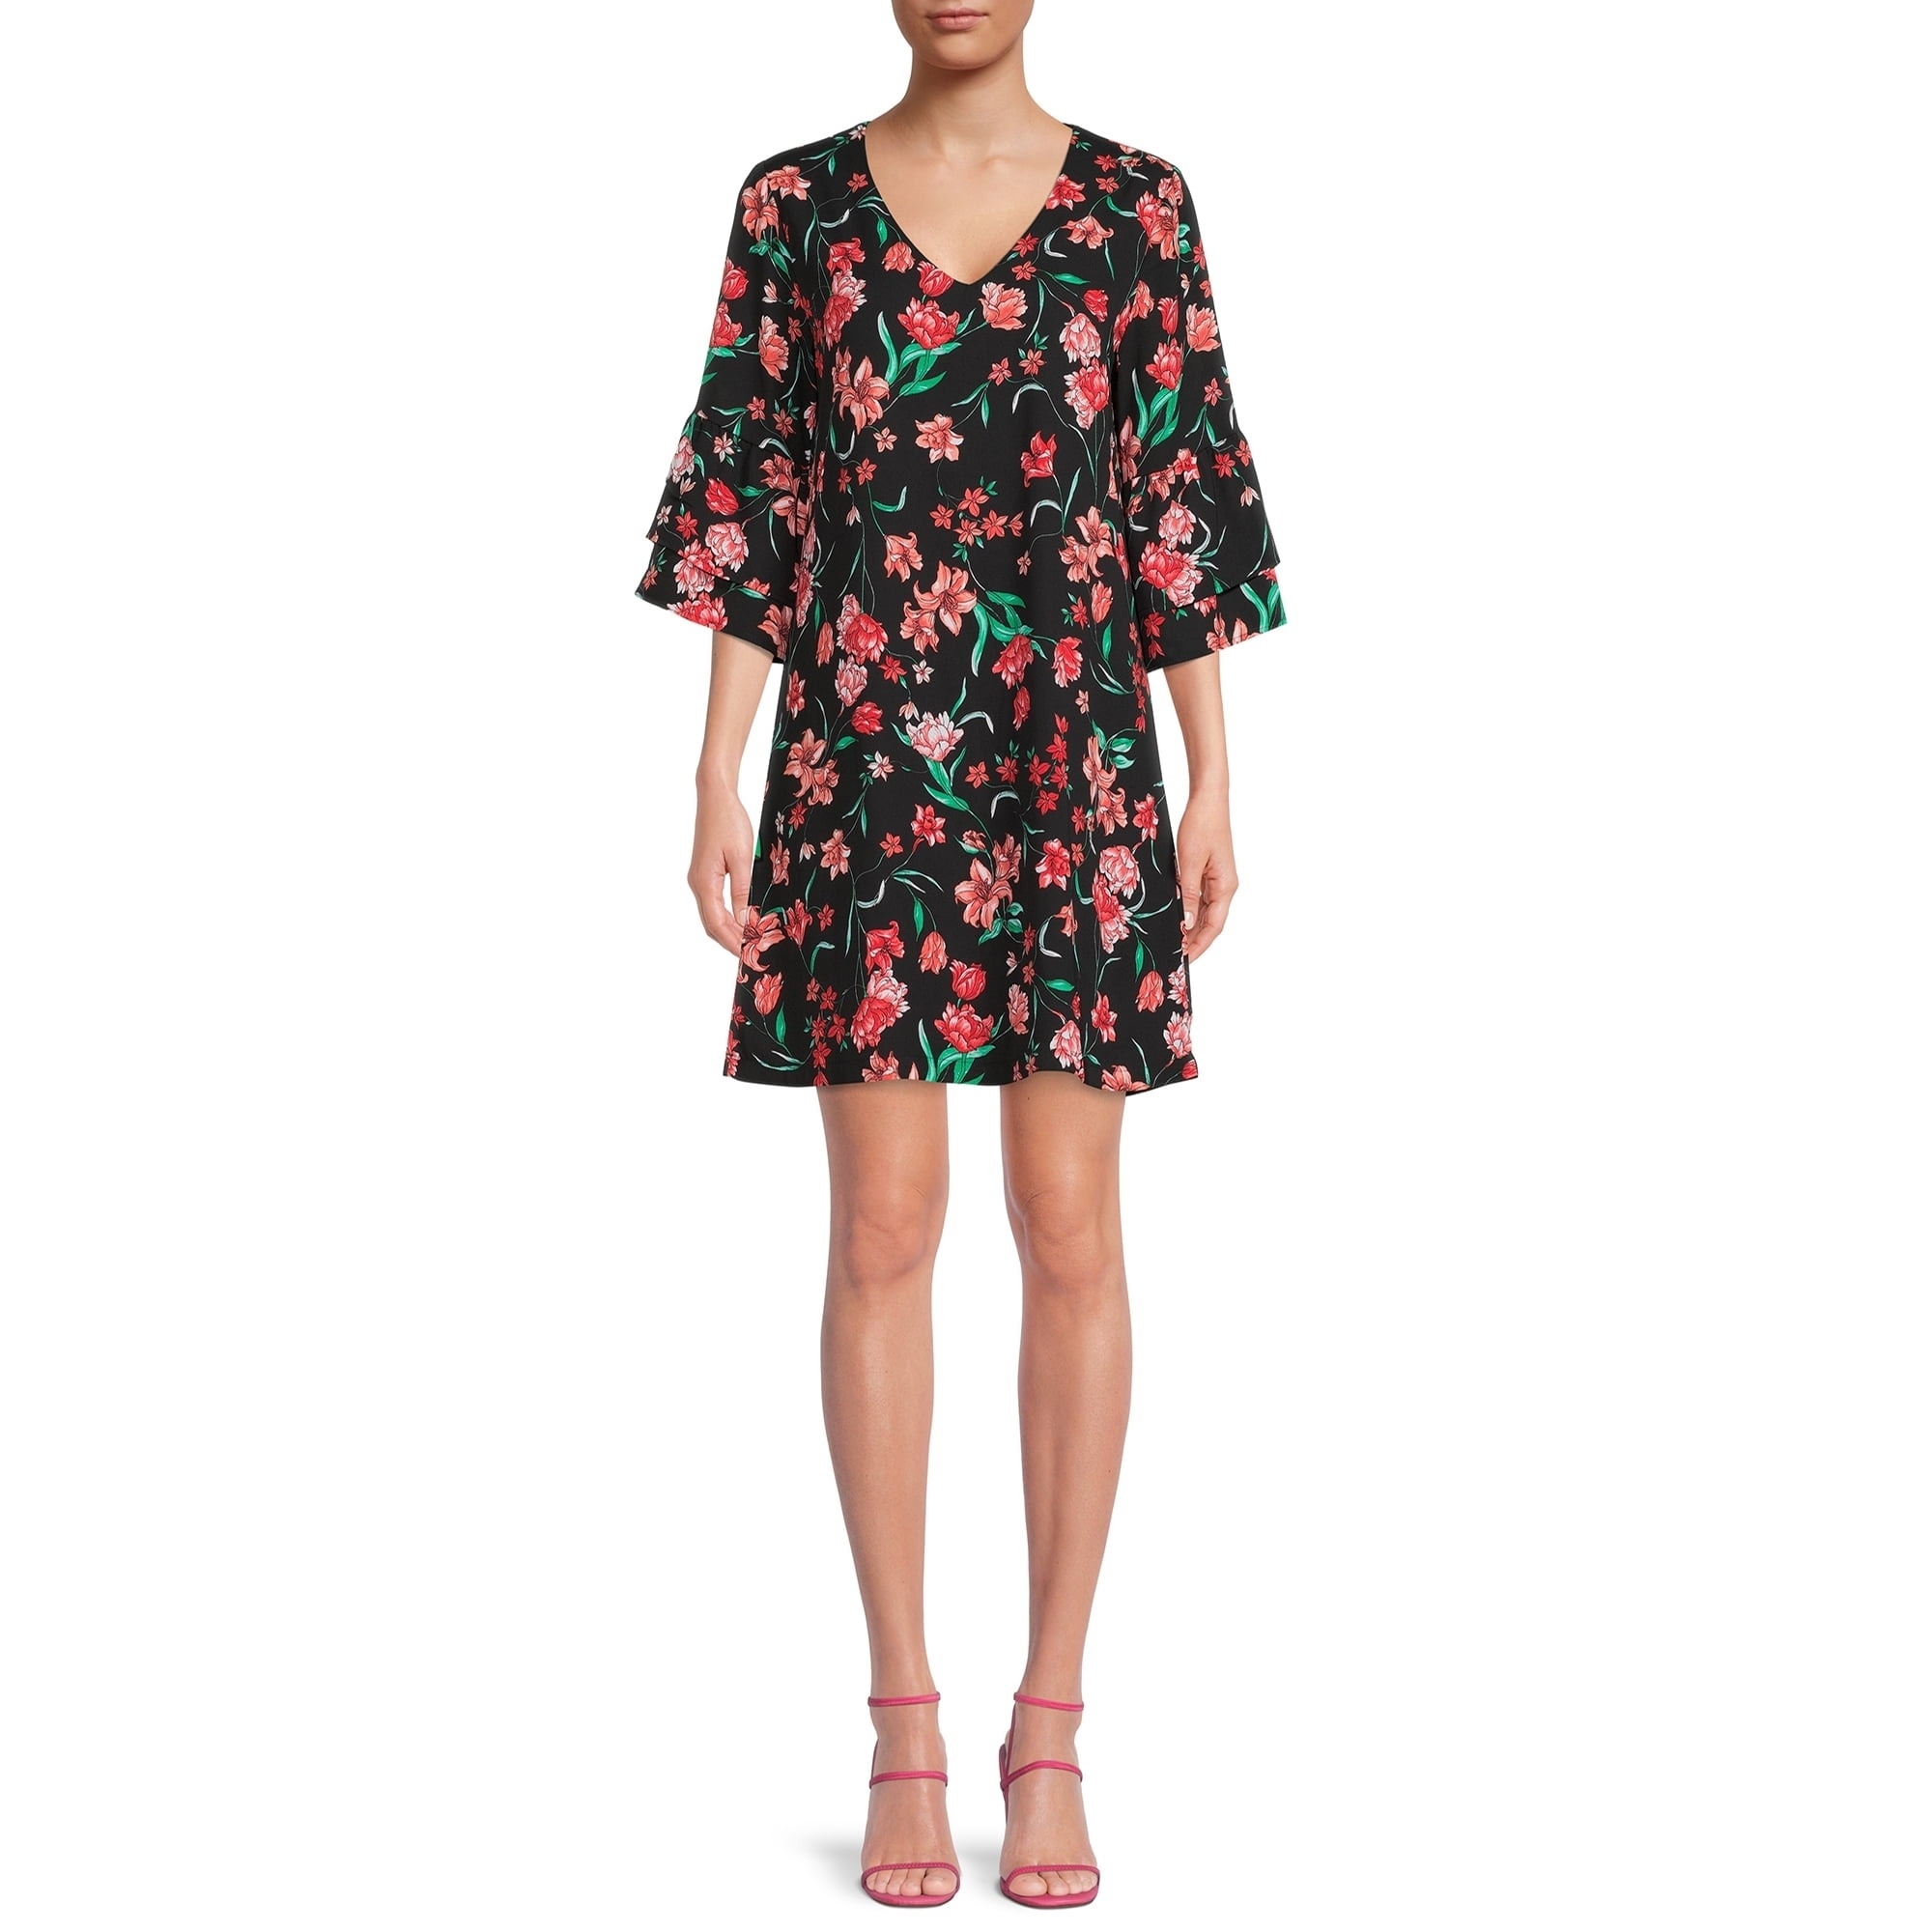 Person wearing a floral dress with a V-neck and ruffled sleeves, paired with pink strappy heels. Perfect for a spring wardrobe update